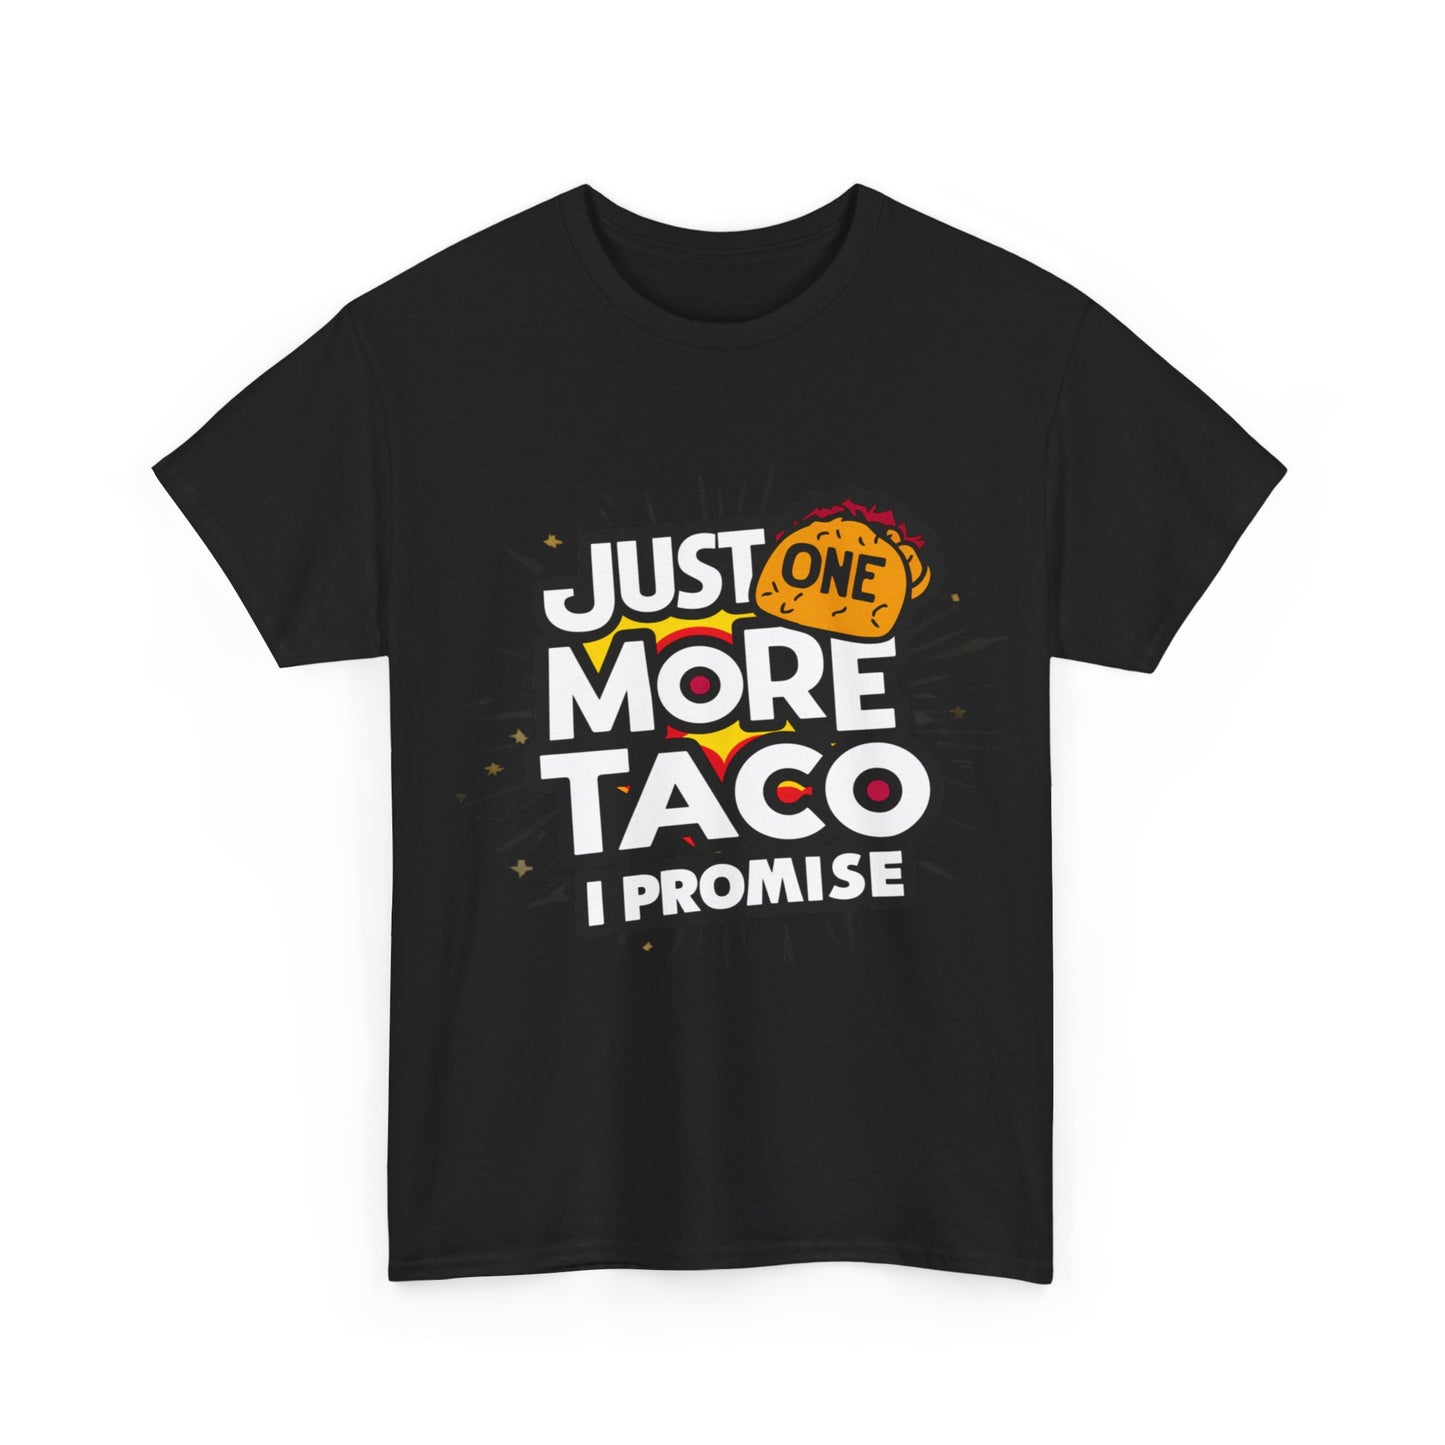 Copy of Just One More Taco I Promise Mexican Food Graphic Unisex Heavy Cotton Tee Cotton Funny Humorous Graphic Soft Premium Unisex Men Women Black T-shirt Birthday Gift-15